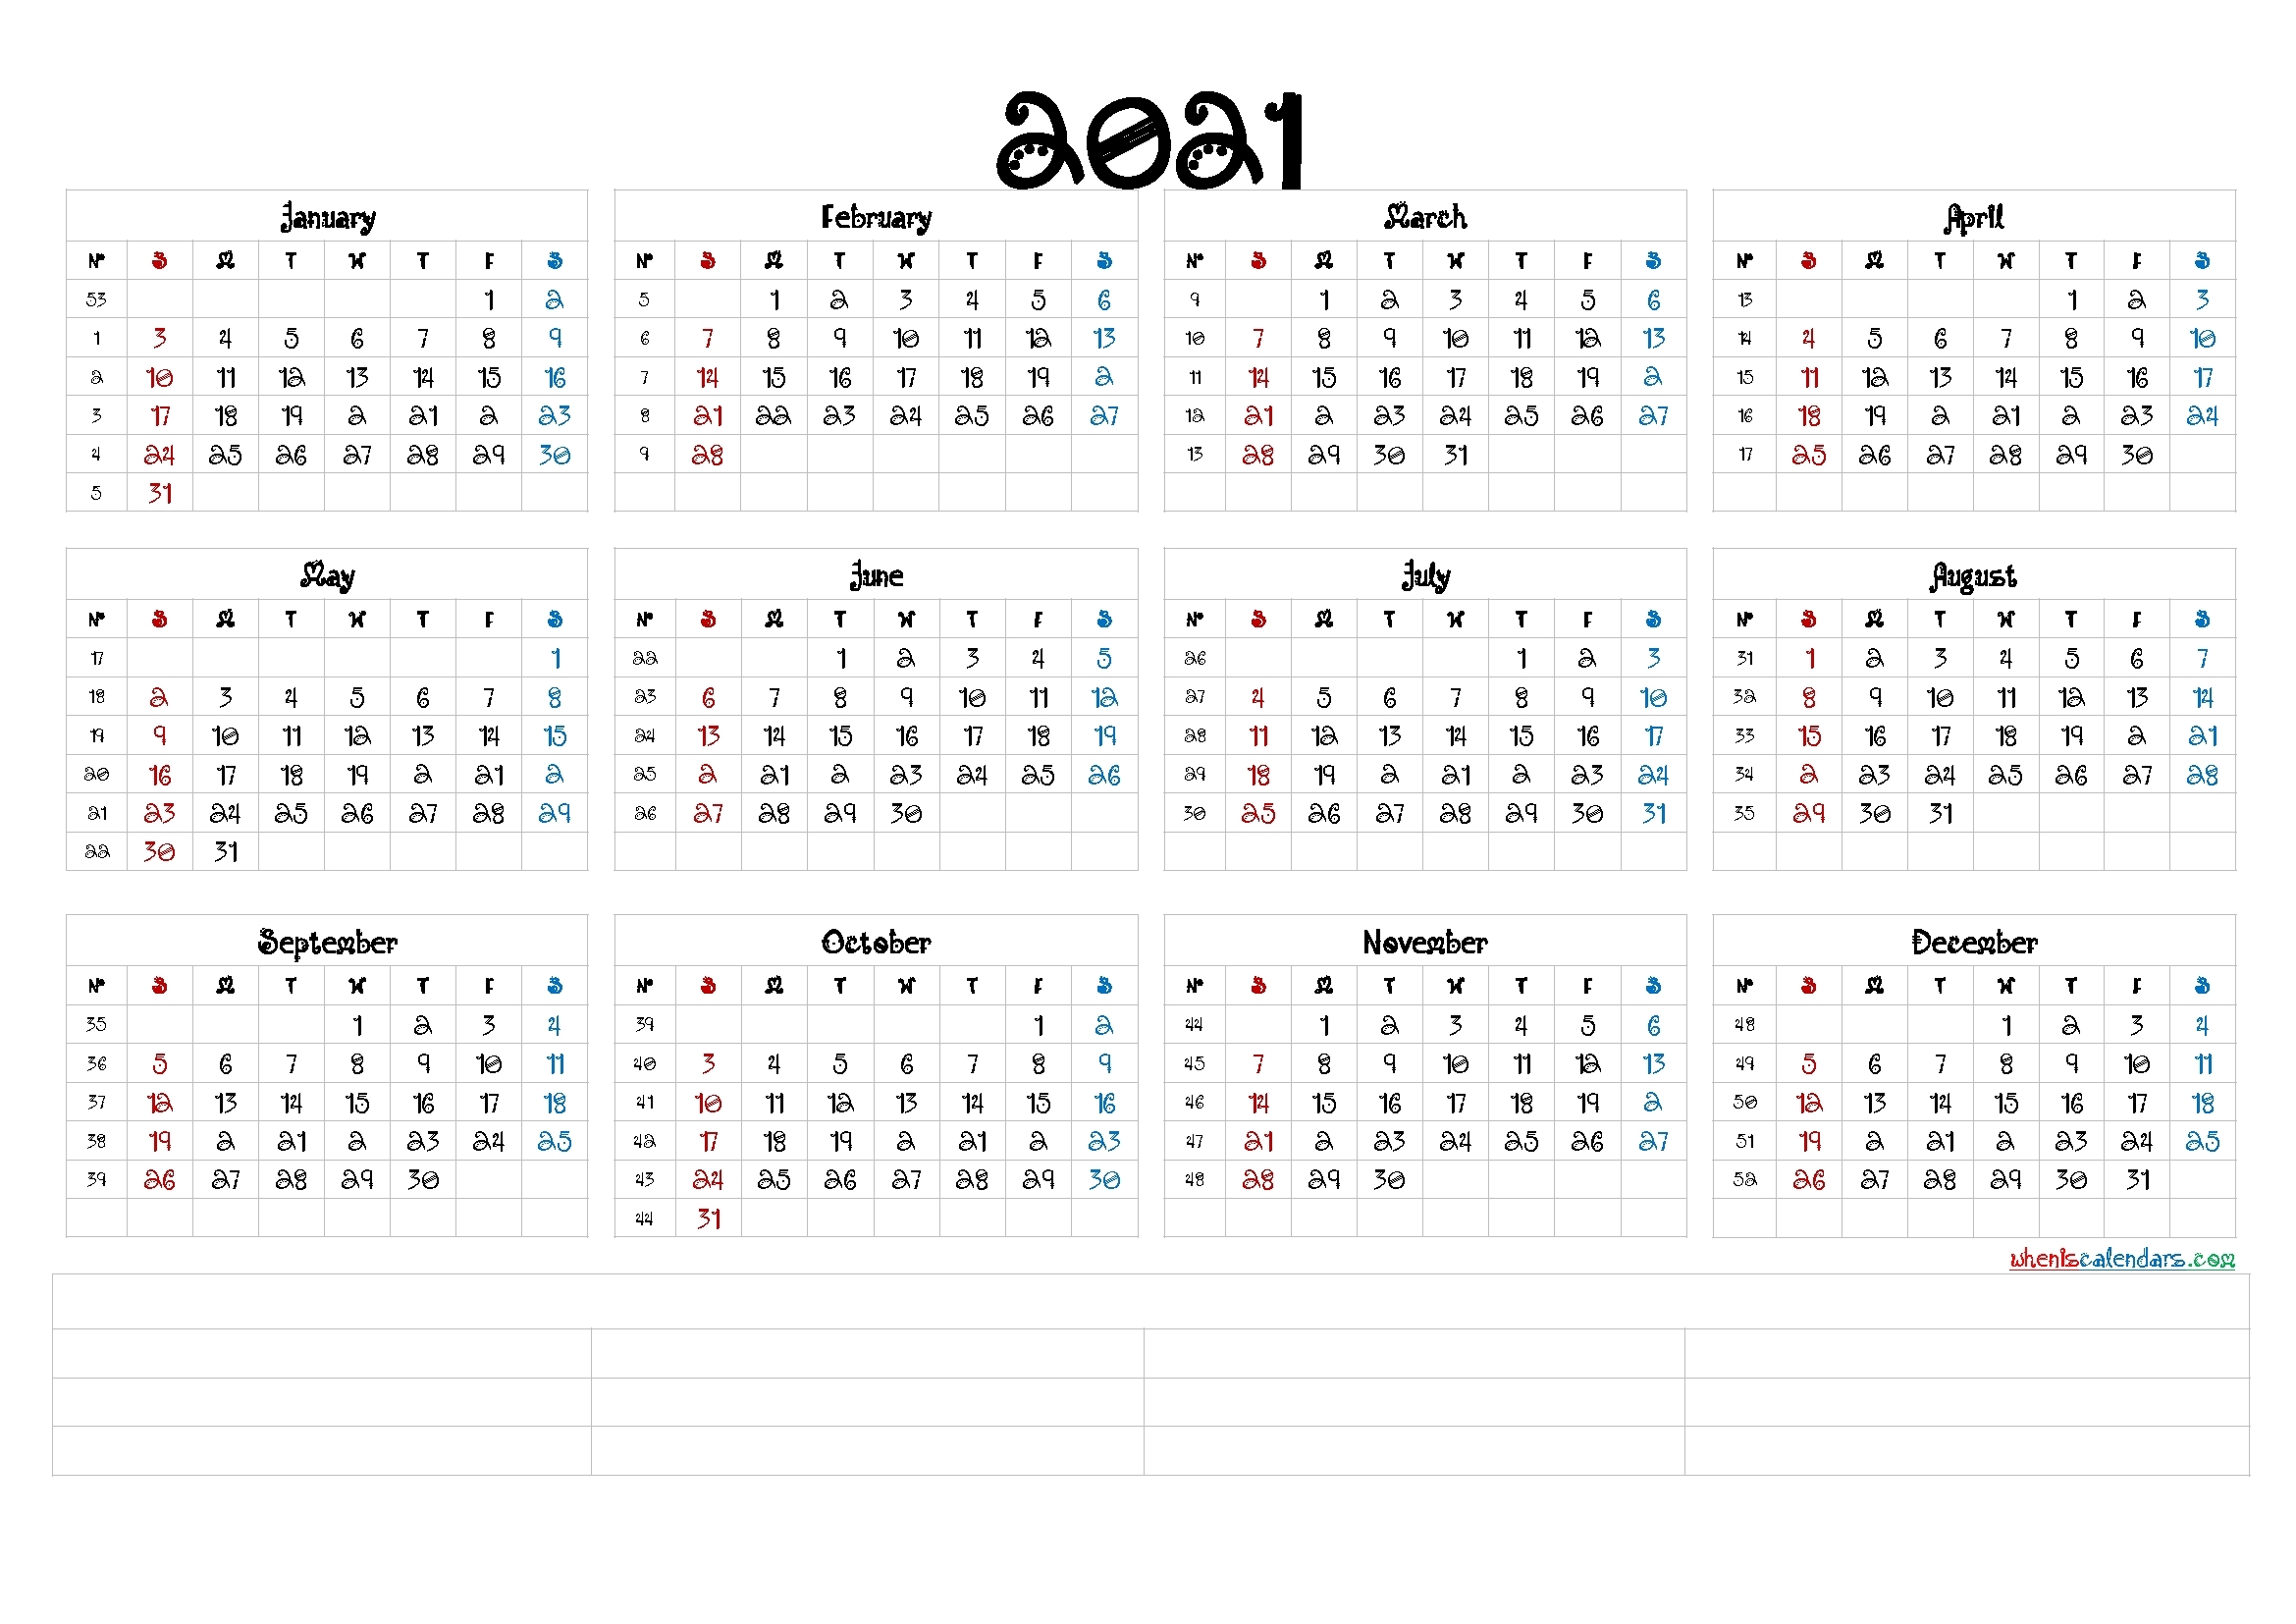 Collect Excel Calendar 2021 With Week Numbers